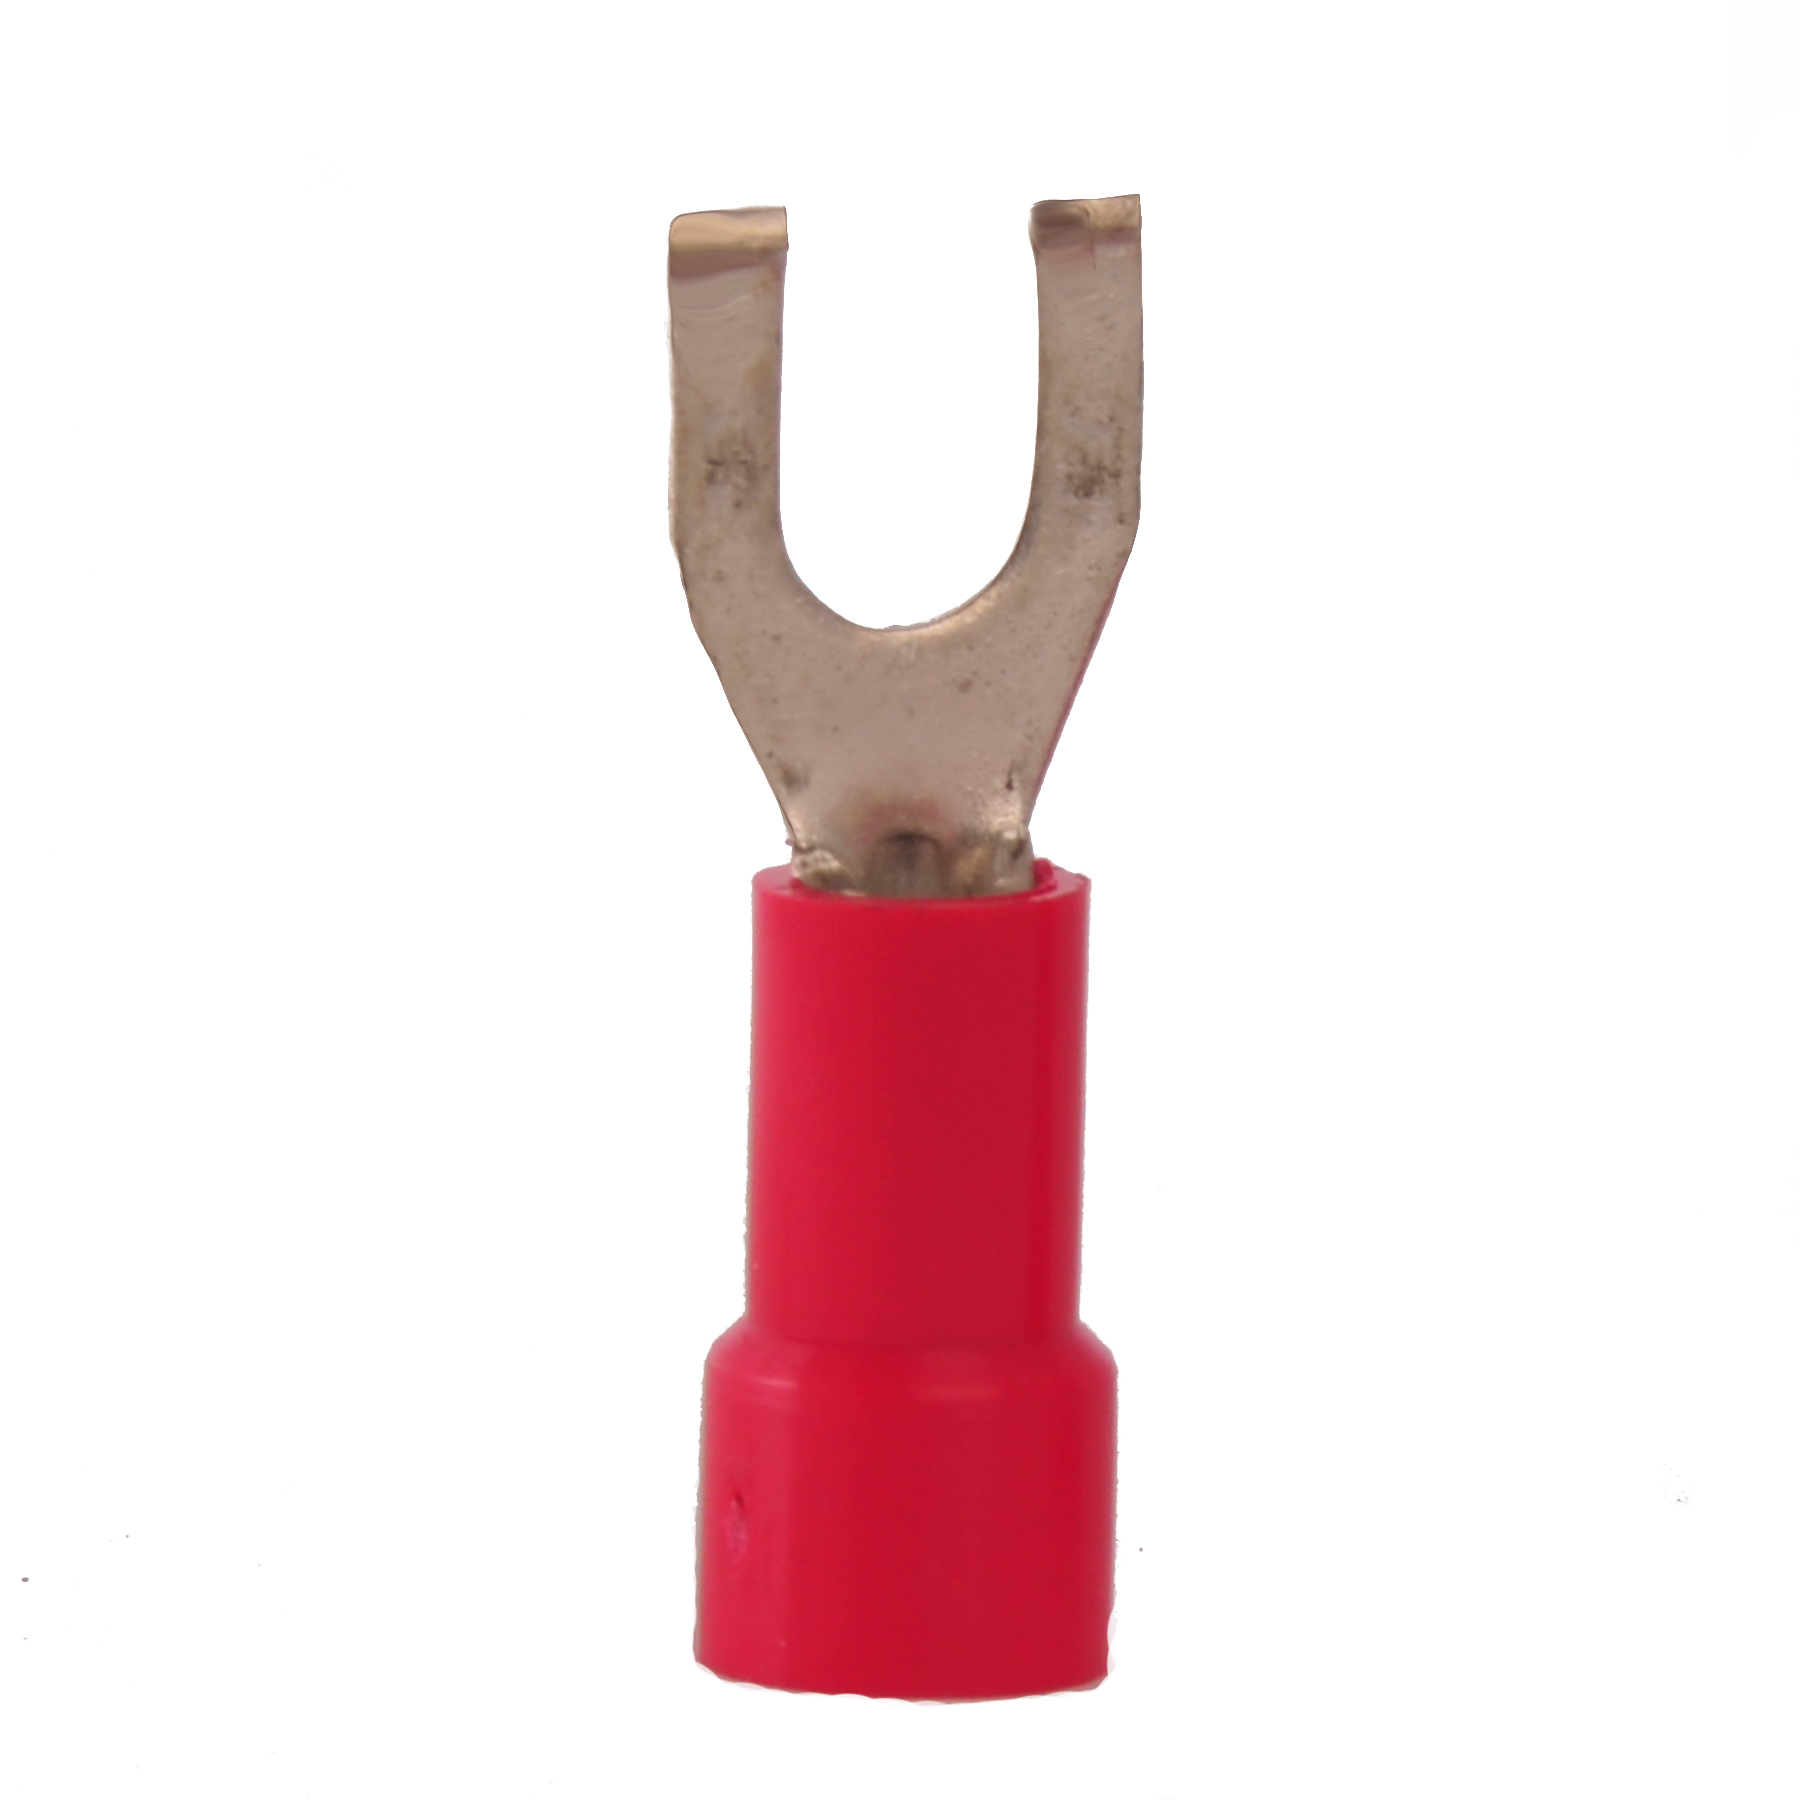 22-18 Vinyl Insulated #6 Flanged Spade